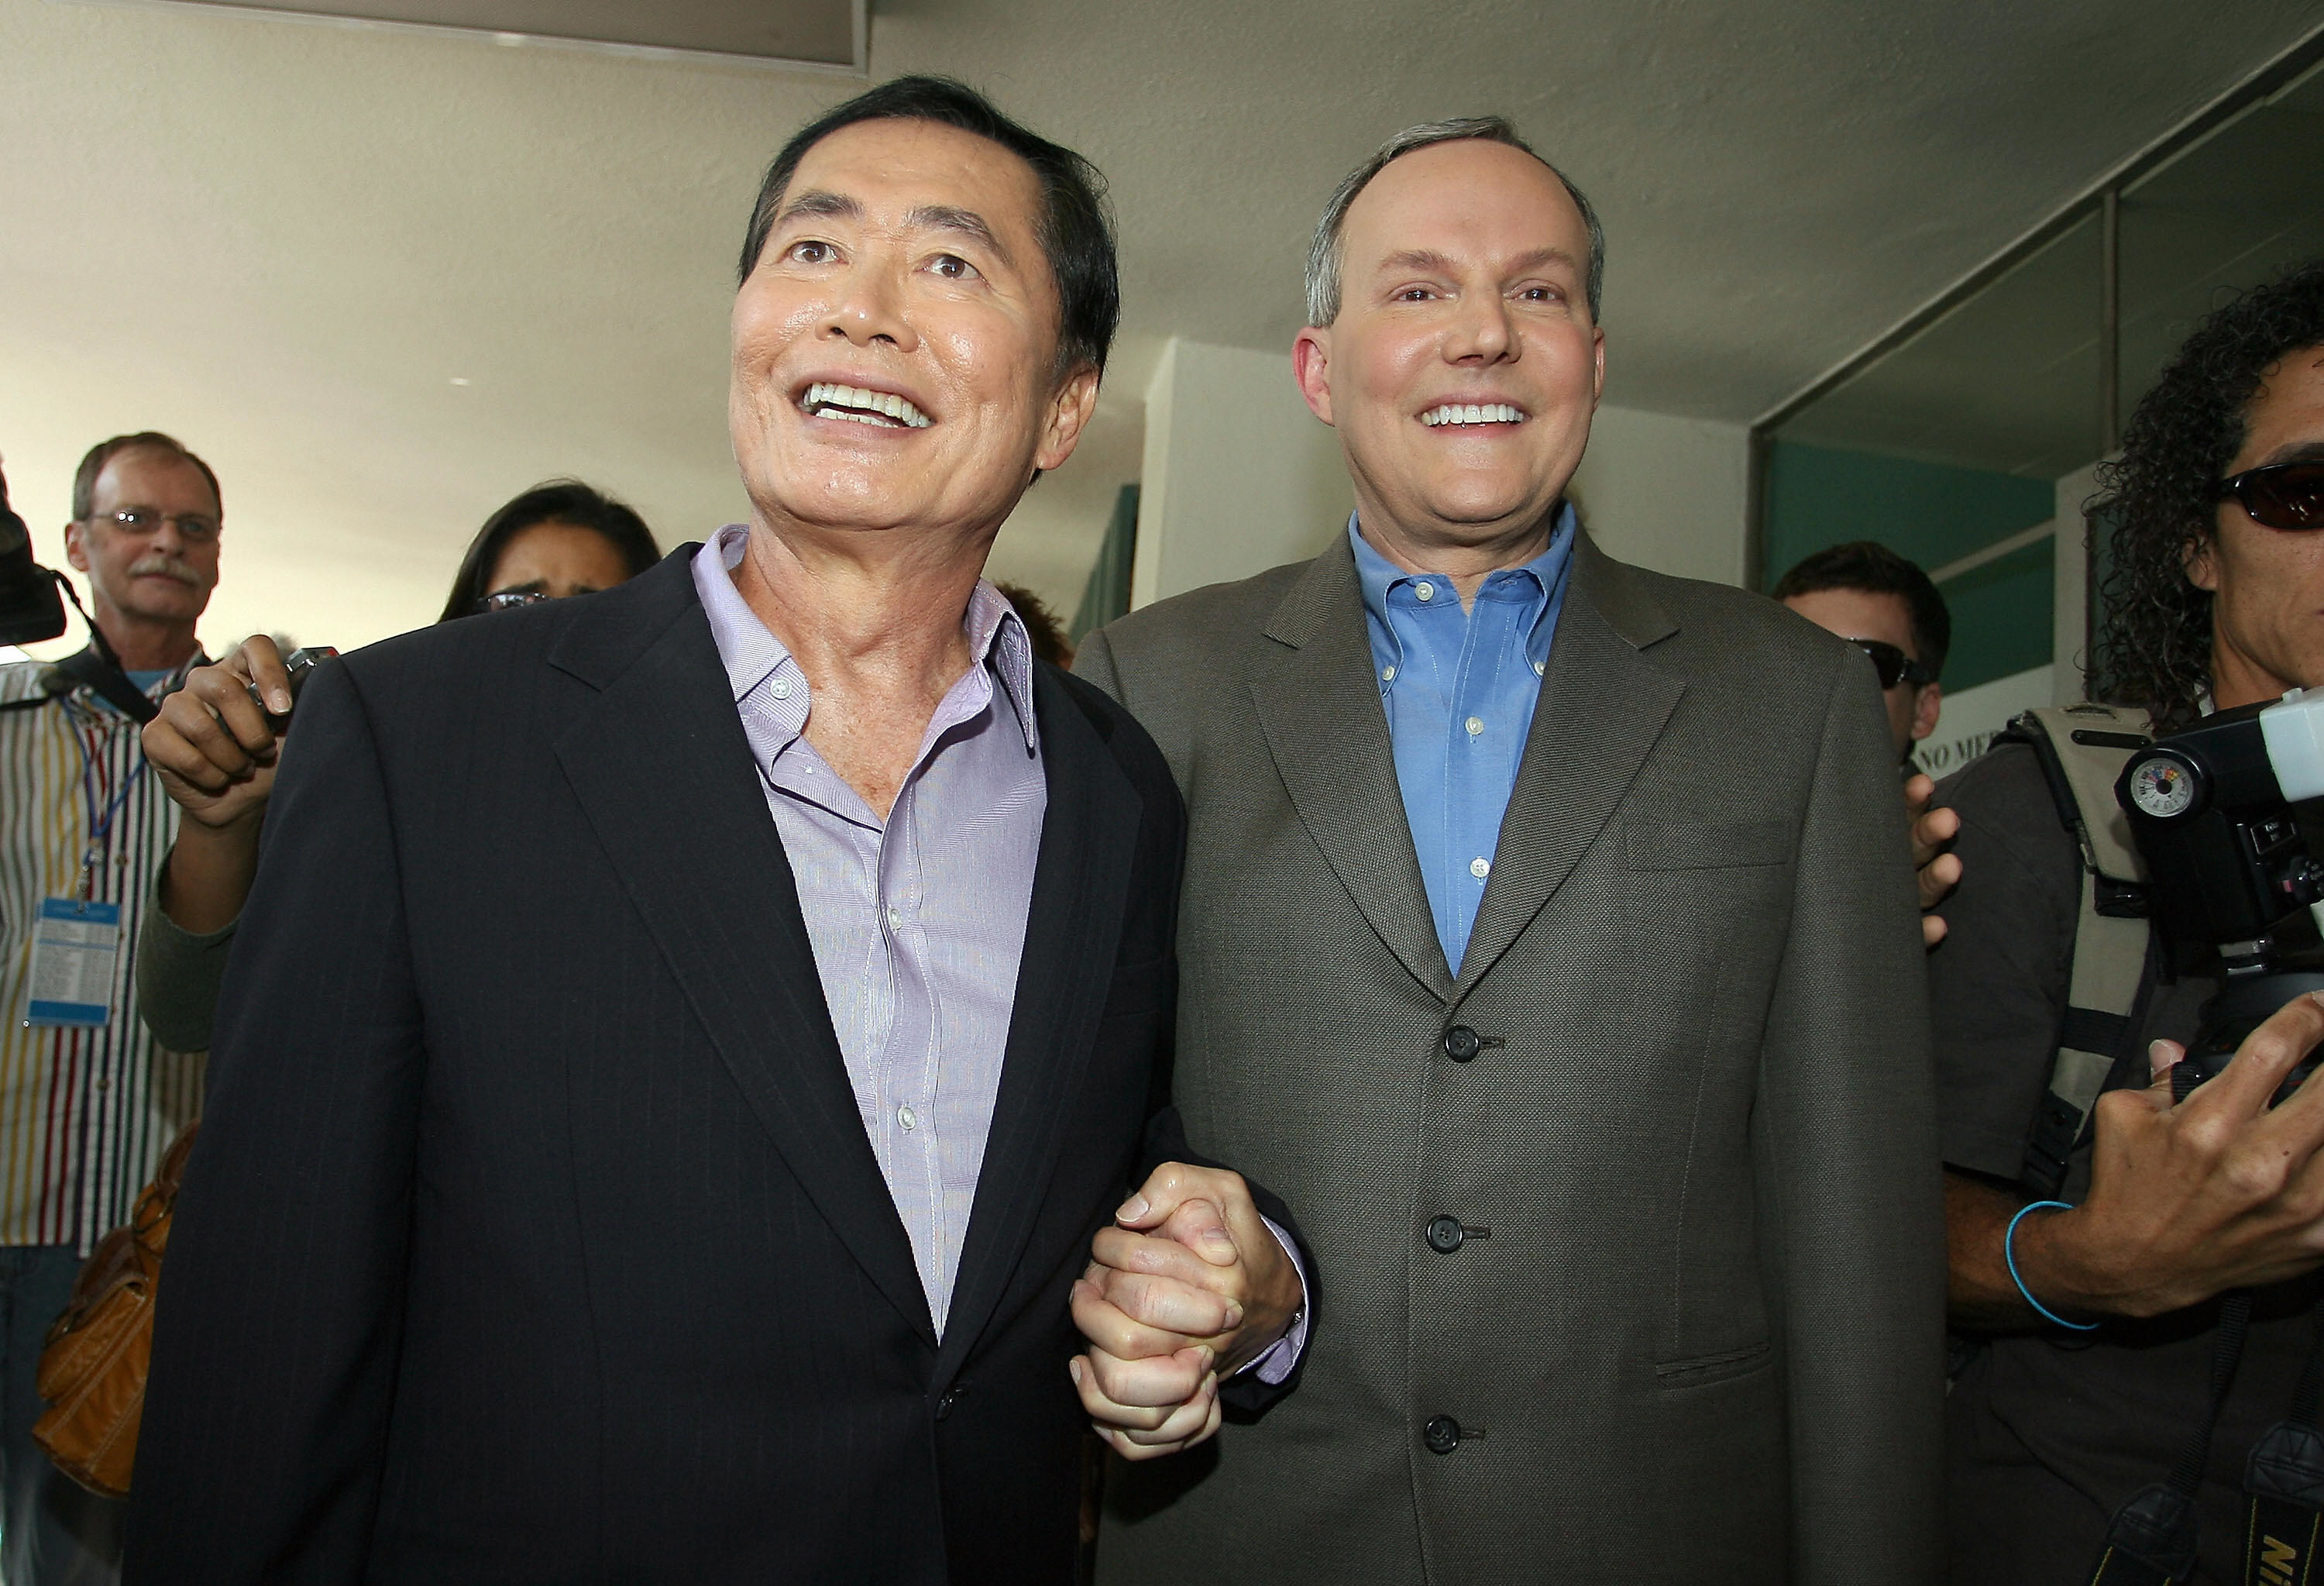 George Takei and his partner, Brad Altman, arrive at West Hollywood Park to get married in West Hollywood on June 17, 2008